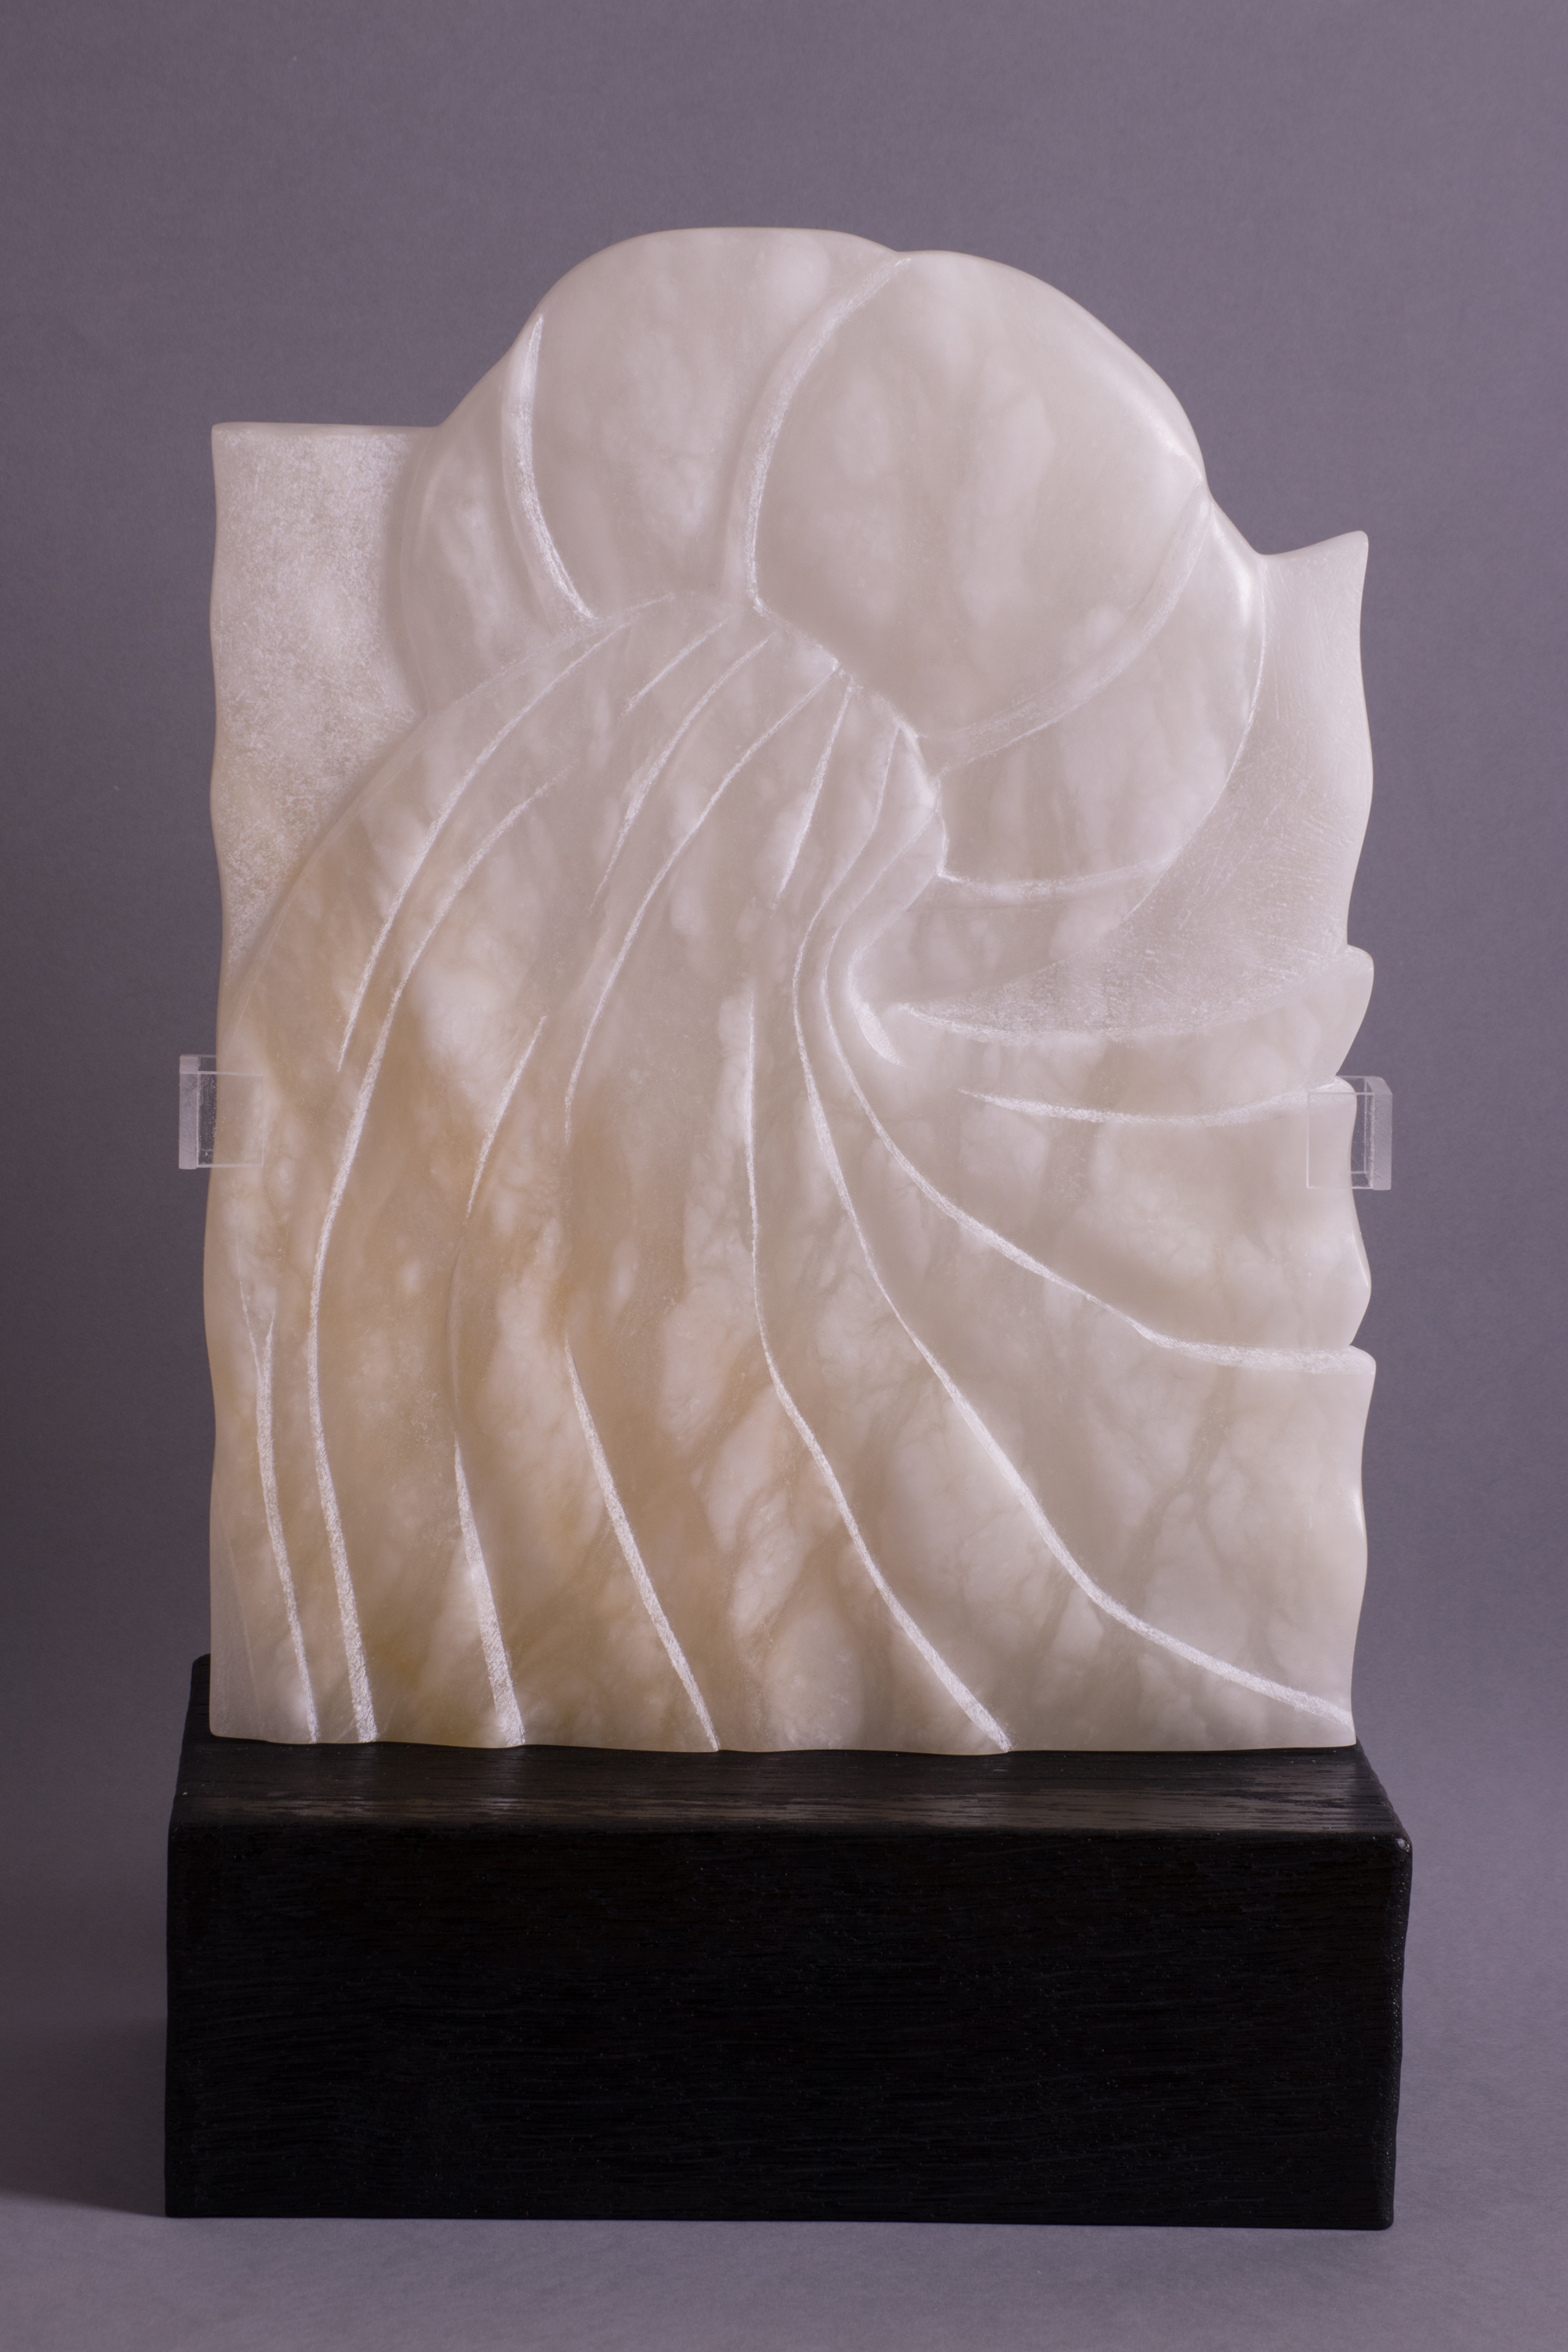 '"Into the Sweet Night" - Alabaster and charred wood plinth' by artist Ann Coomber